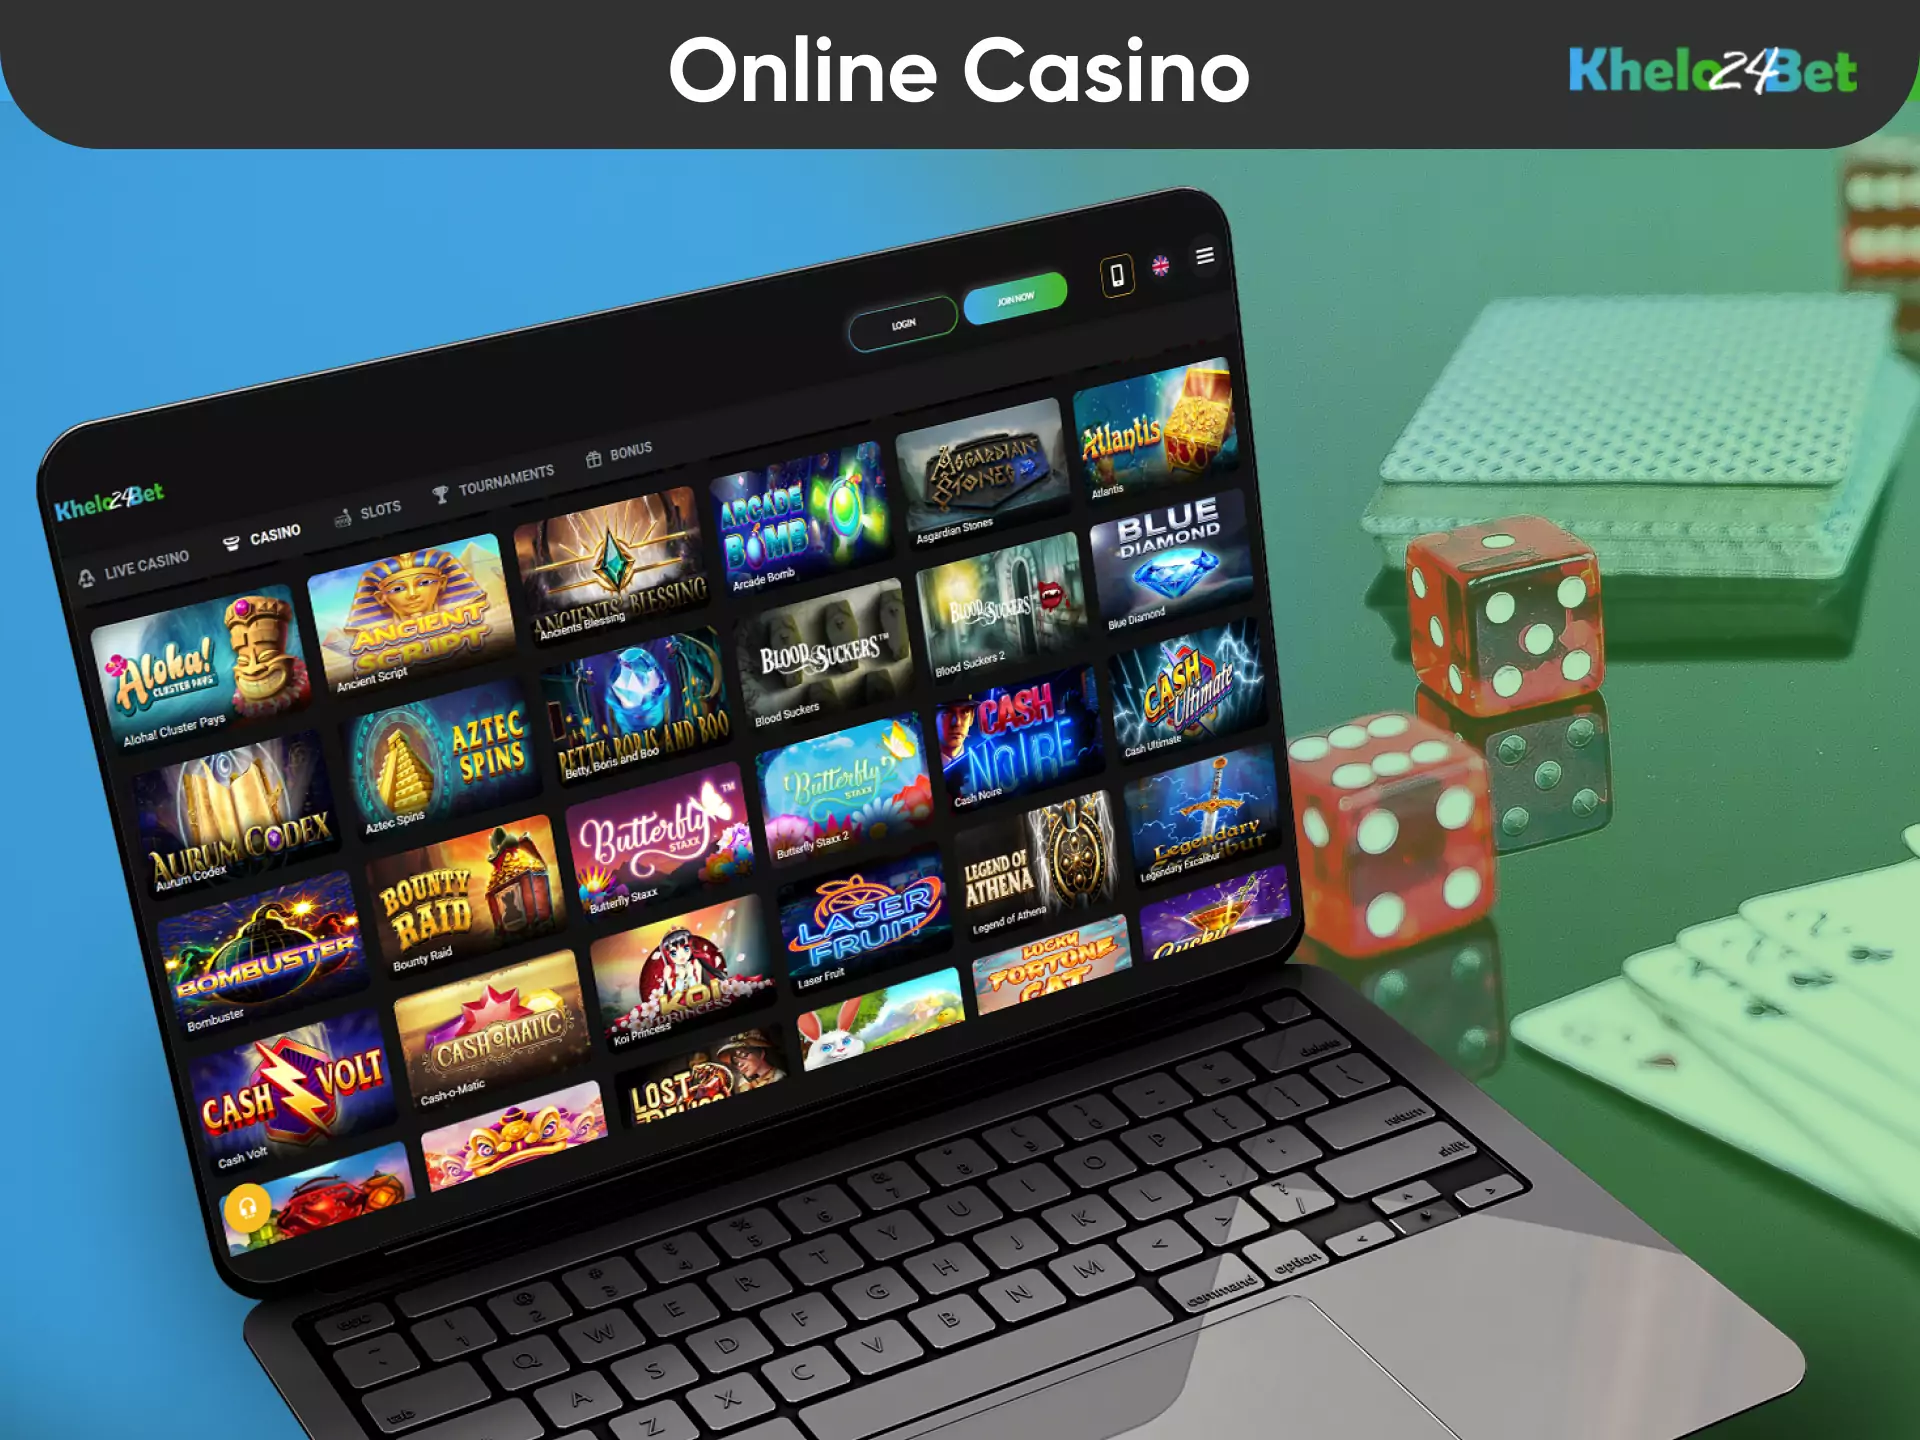 Besides betting, you can play numerous games in the Khelo24bet Casino.